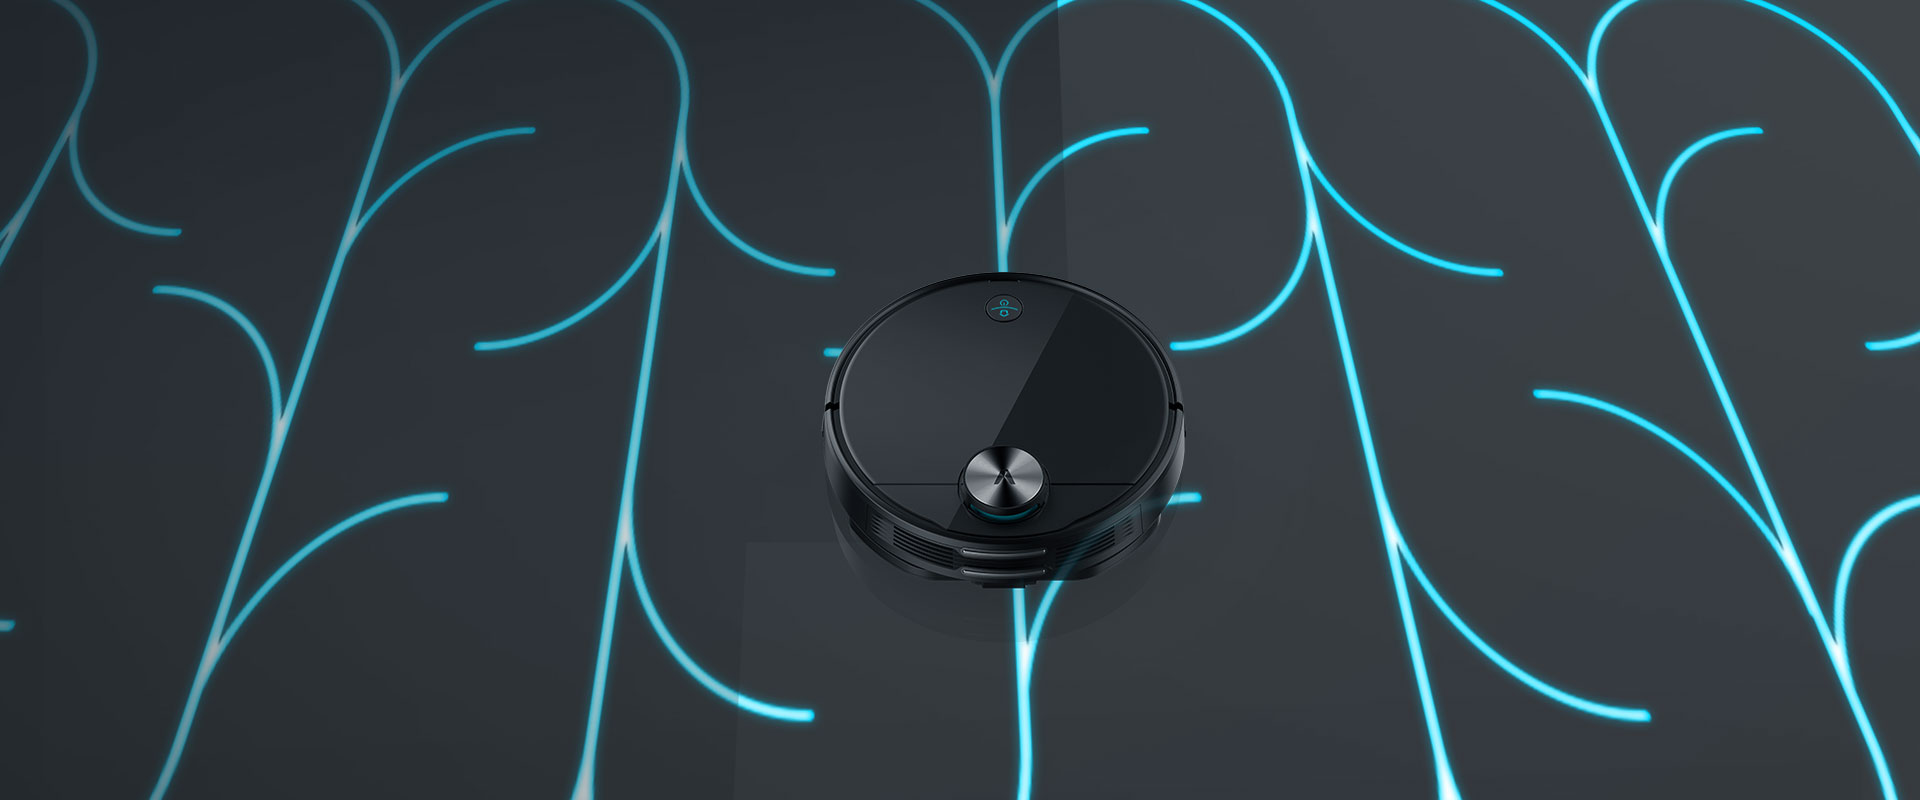 Viomi V3 smart vacuum with S/Y Dual Mopping Patterns